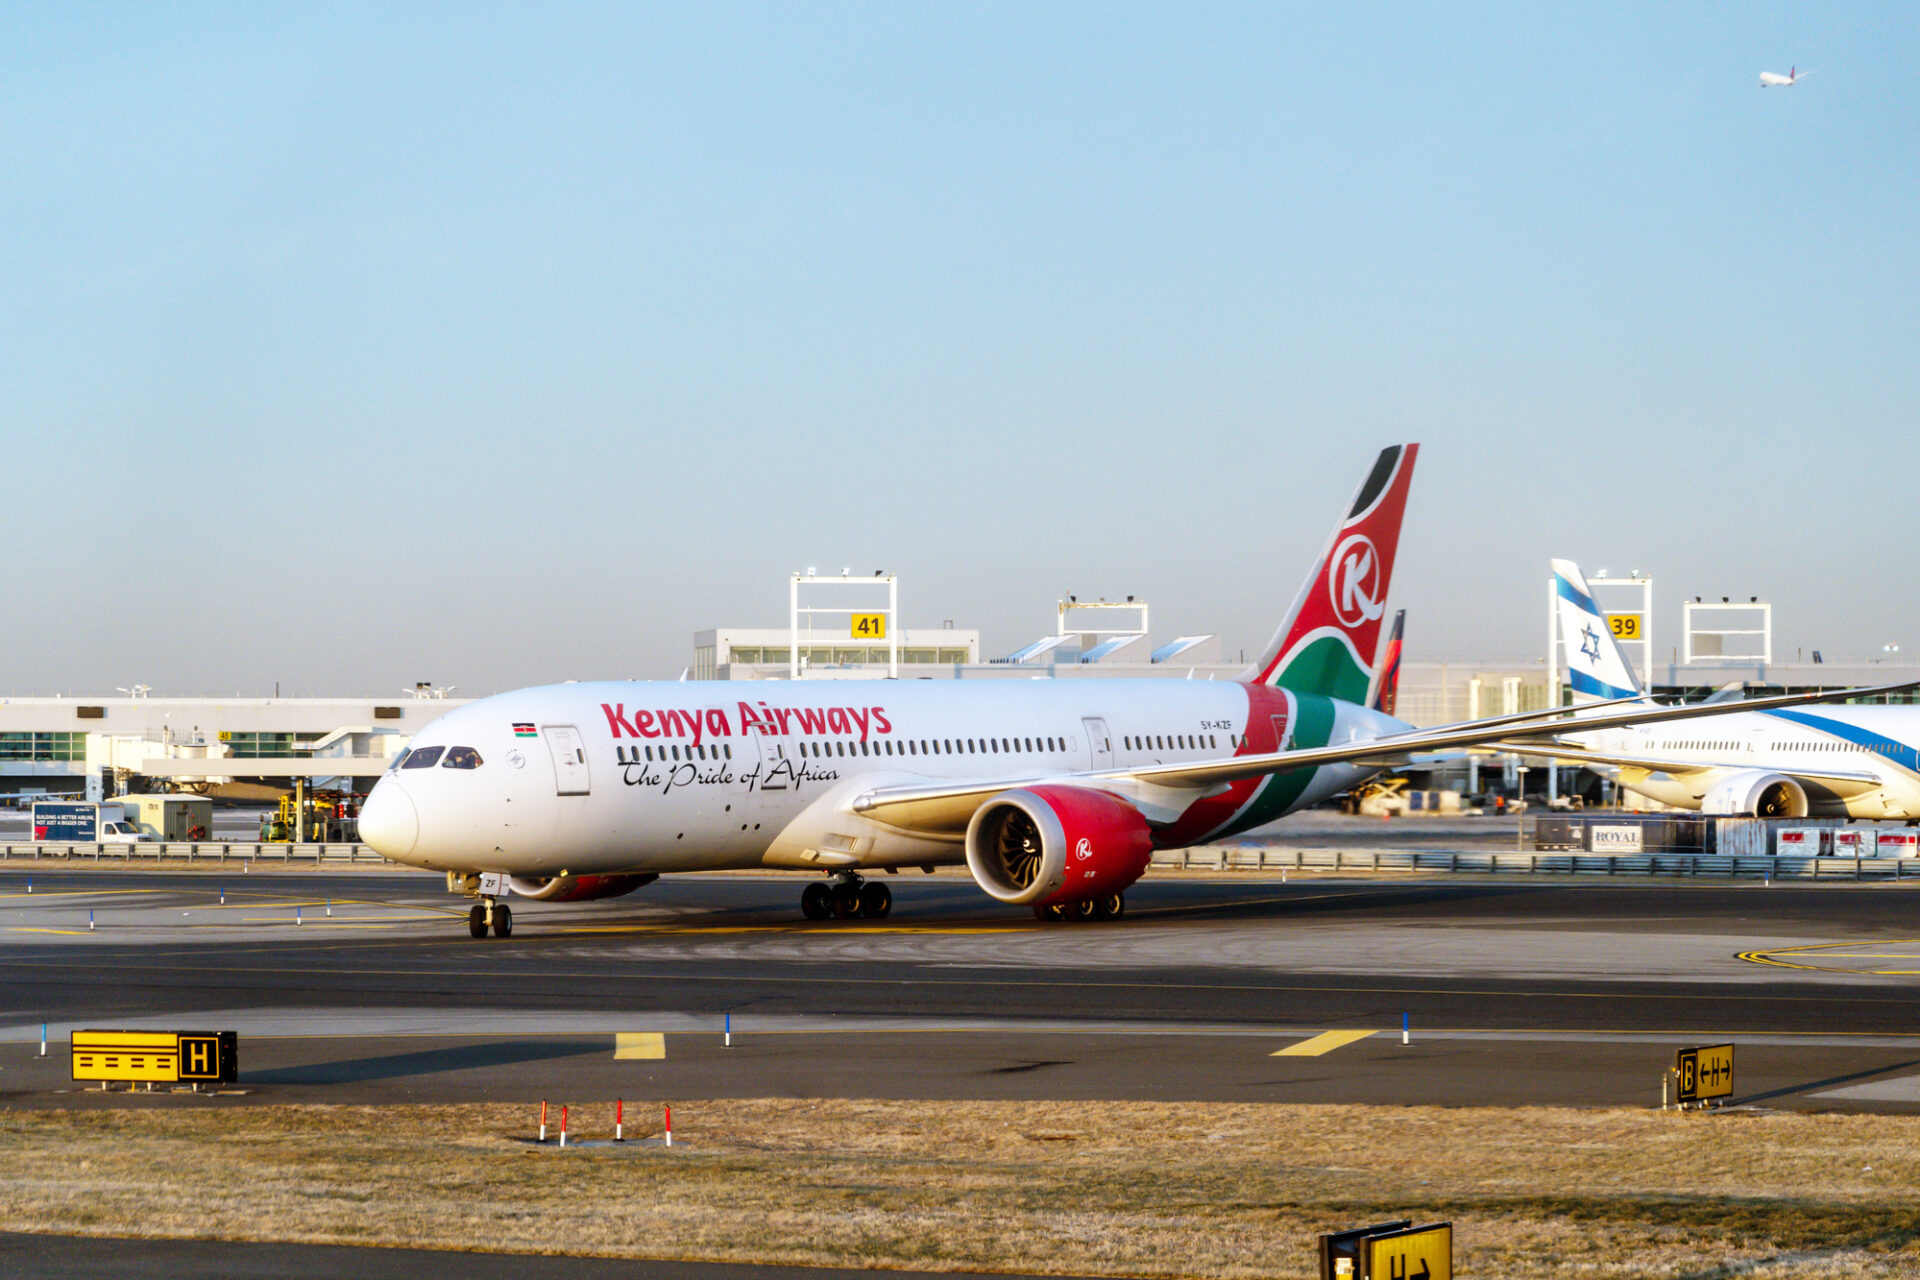 Kenya Airways to launch Minnesota connection to New York Nairobi nonstop - Travel News, Insights & Resources.